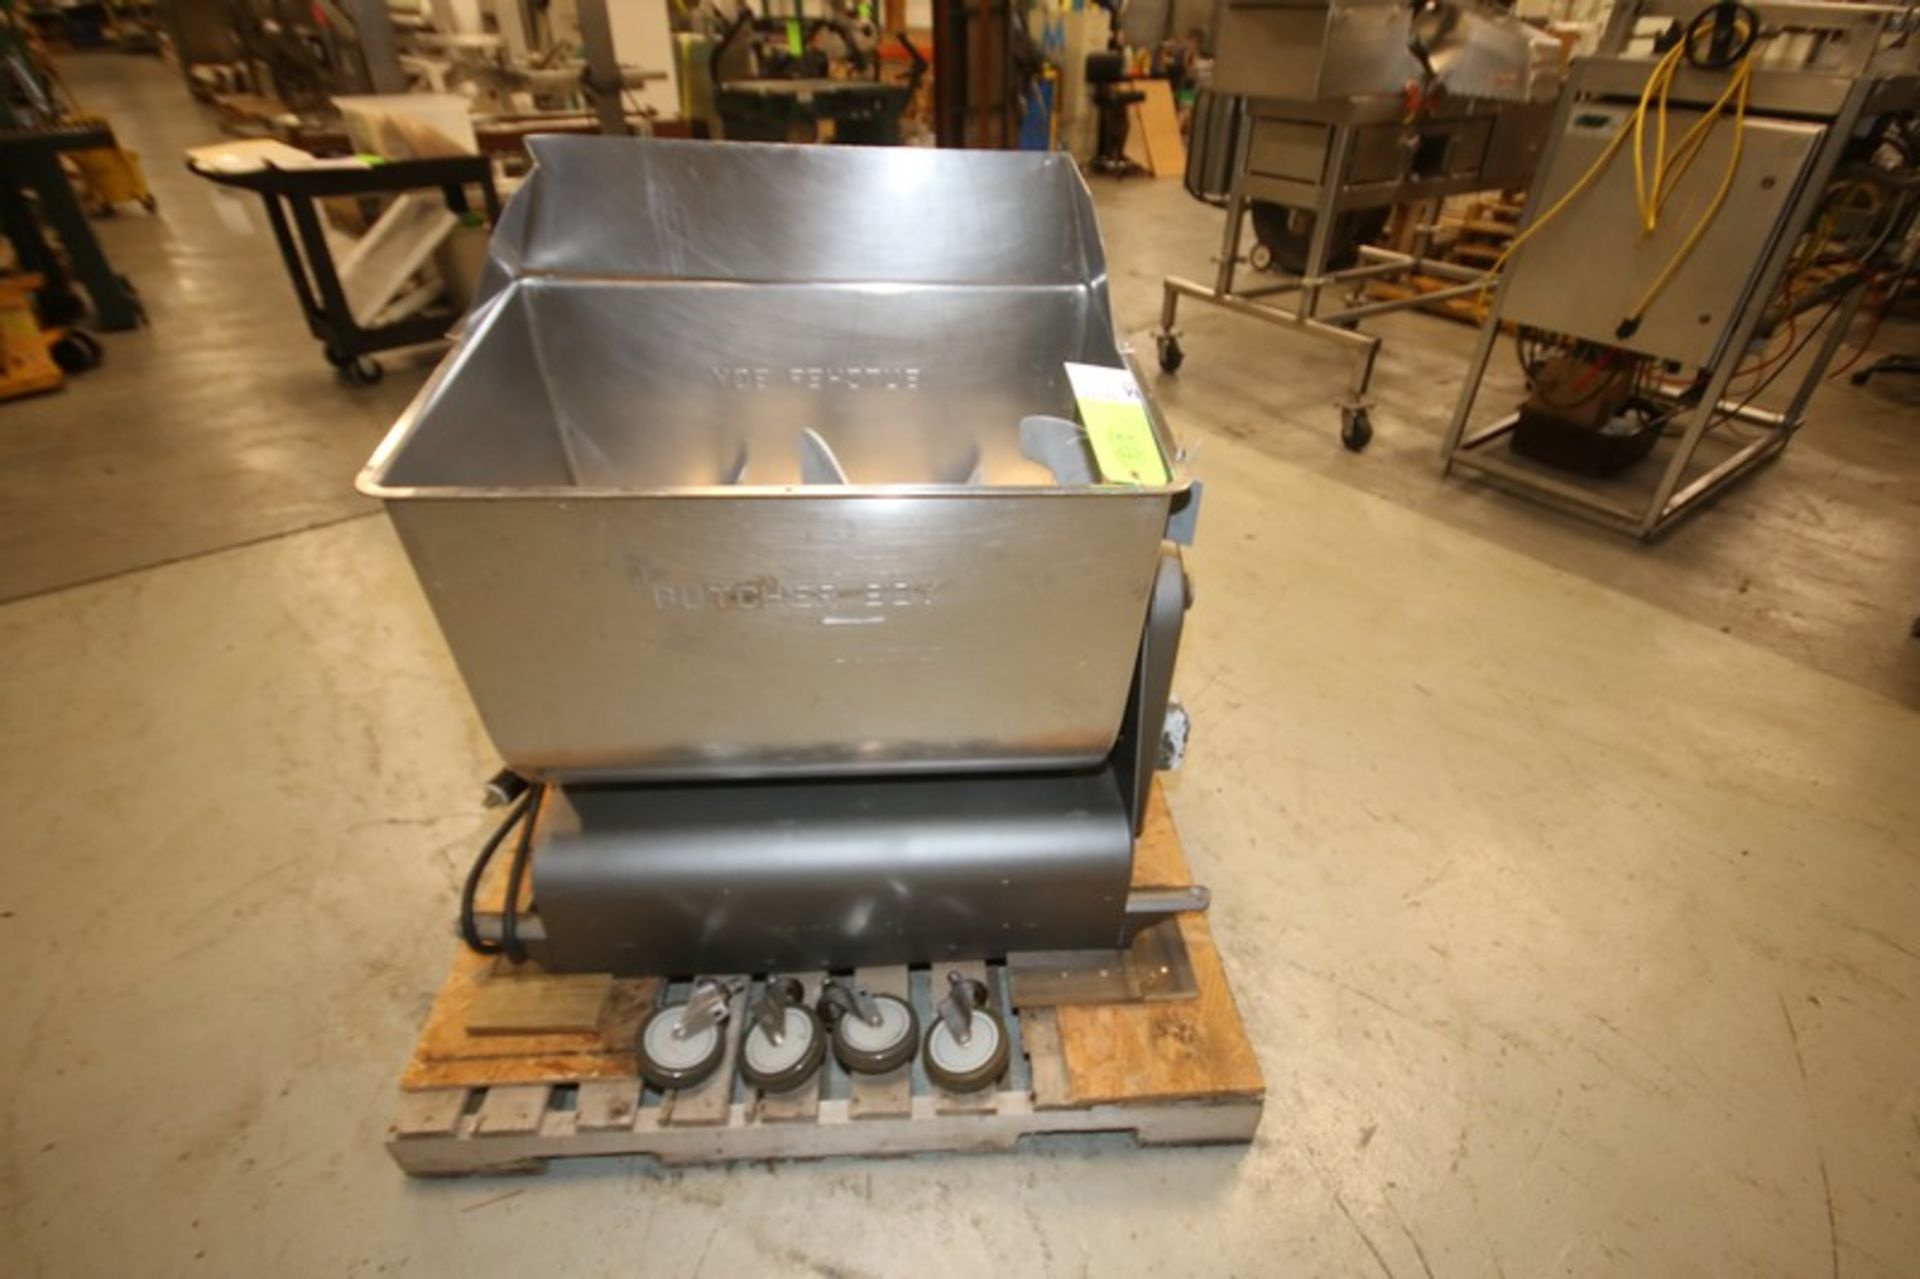 Butcher Boy 31" L x 20" W x 23" D Horizontal S/S Meat Mixer, Possibly Model 150, with Casters, ( - Image 5 of 7